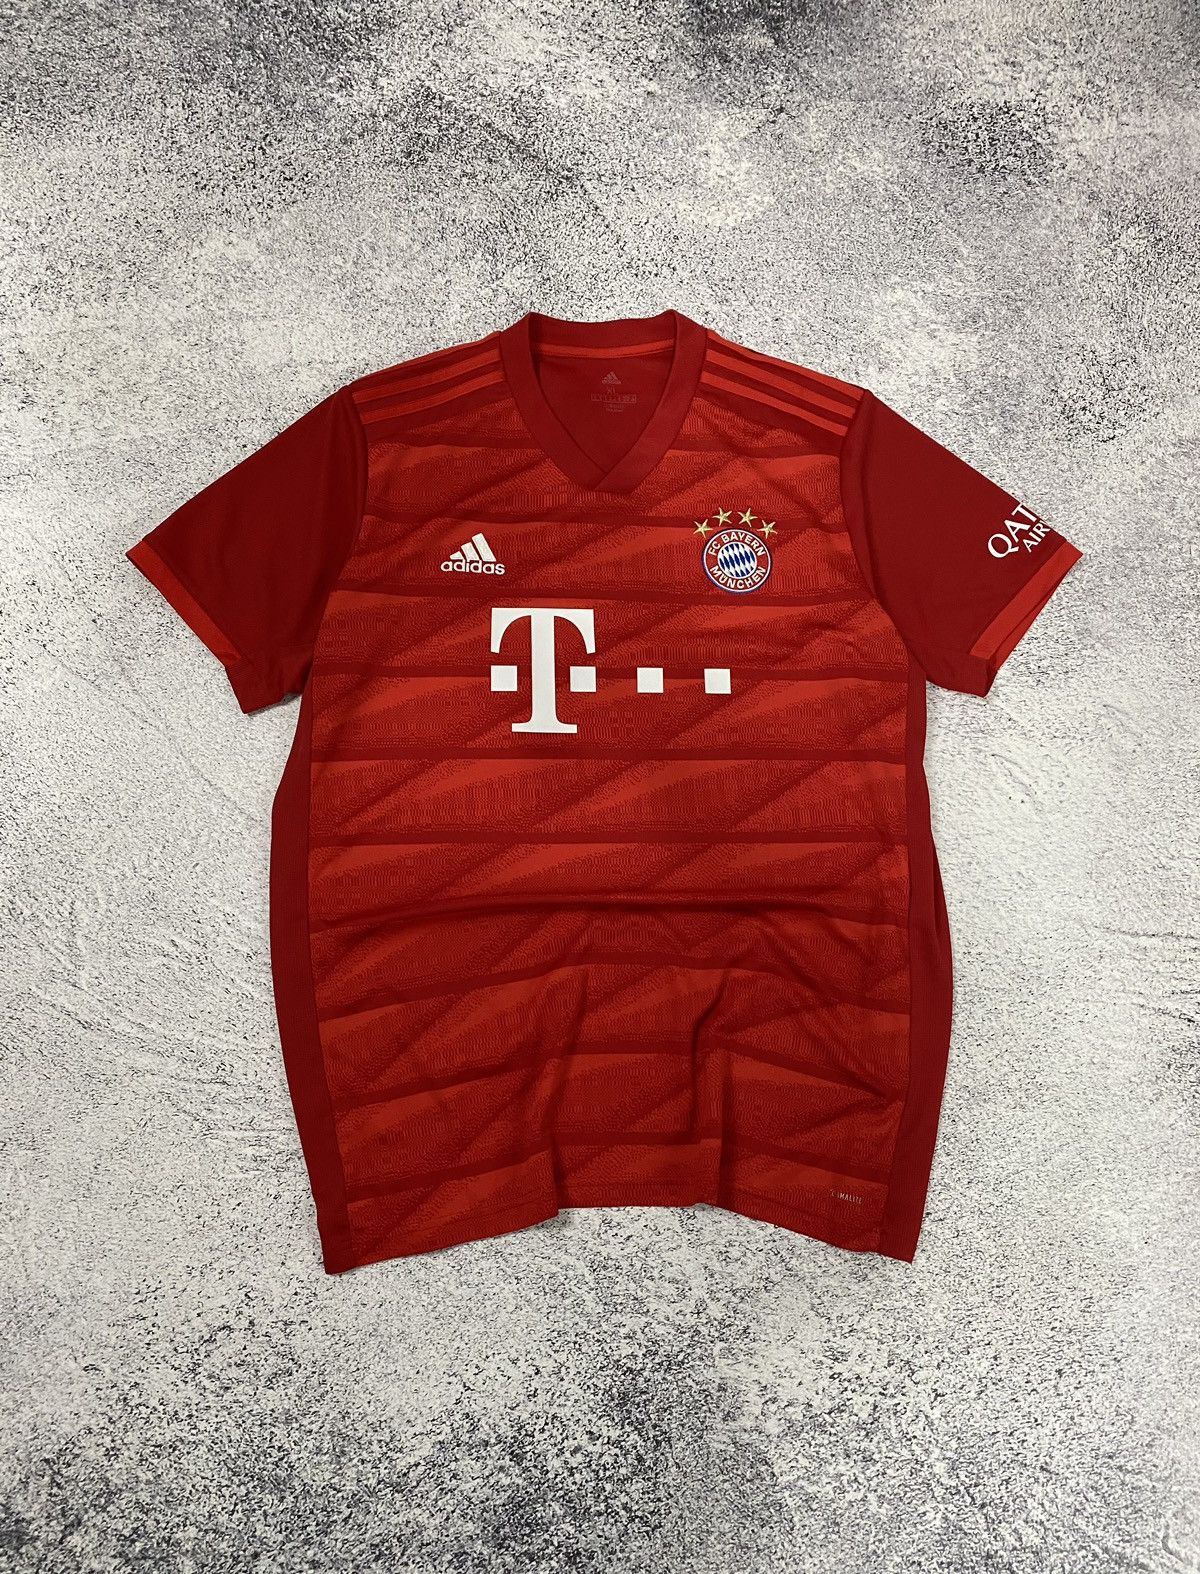 Pre-owned Adidas X Soccer Jersey Adidas Fc Bayern Munich 2019/2020 Home Soccer Jersey Shirt In Red